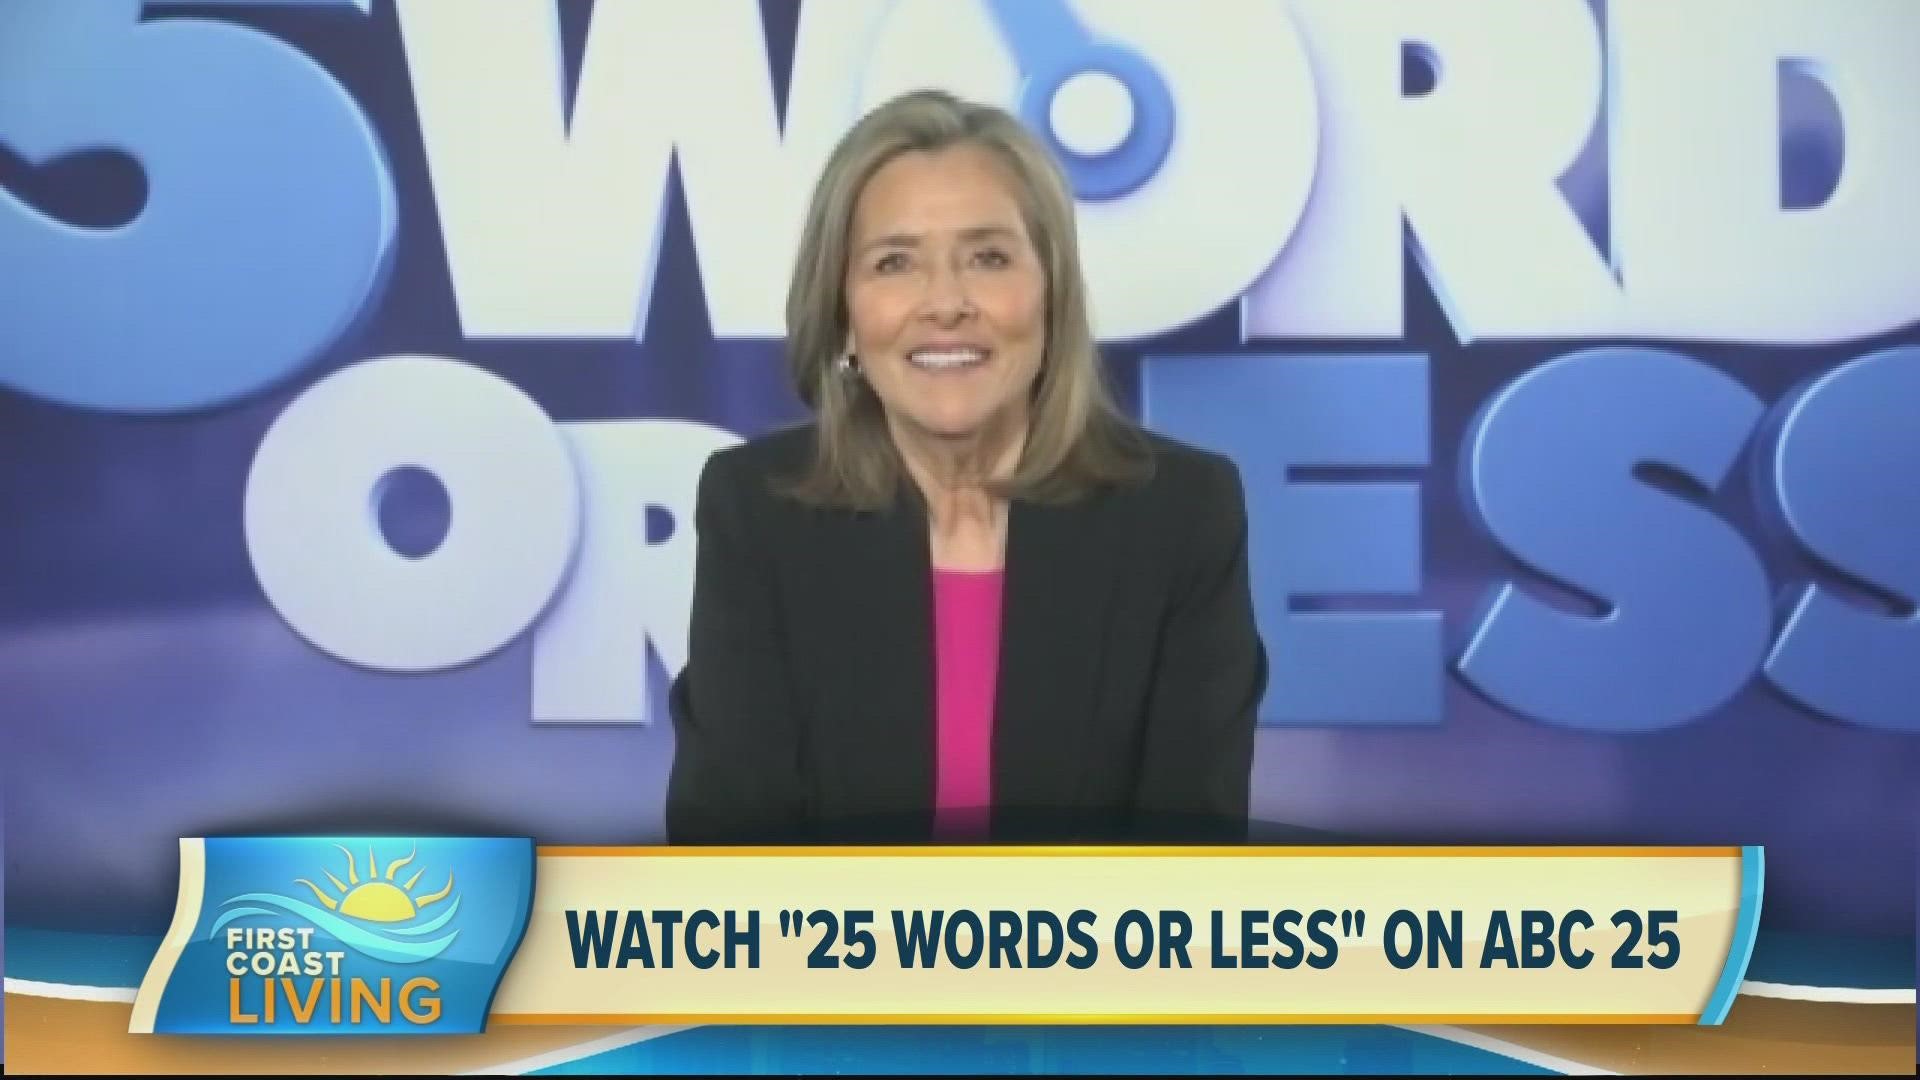 Host, Meredith Vieira shares details on how you can win $1,000 from the comfort of your home!